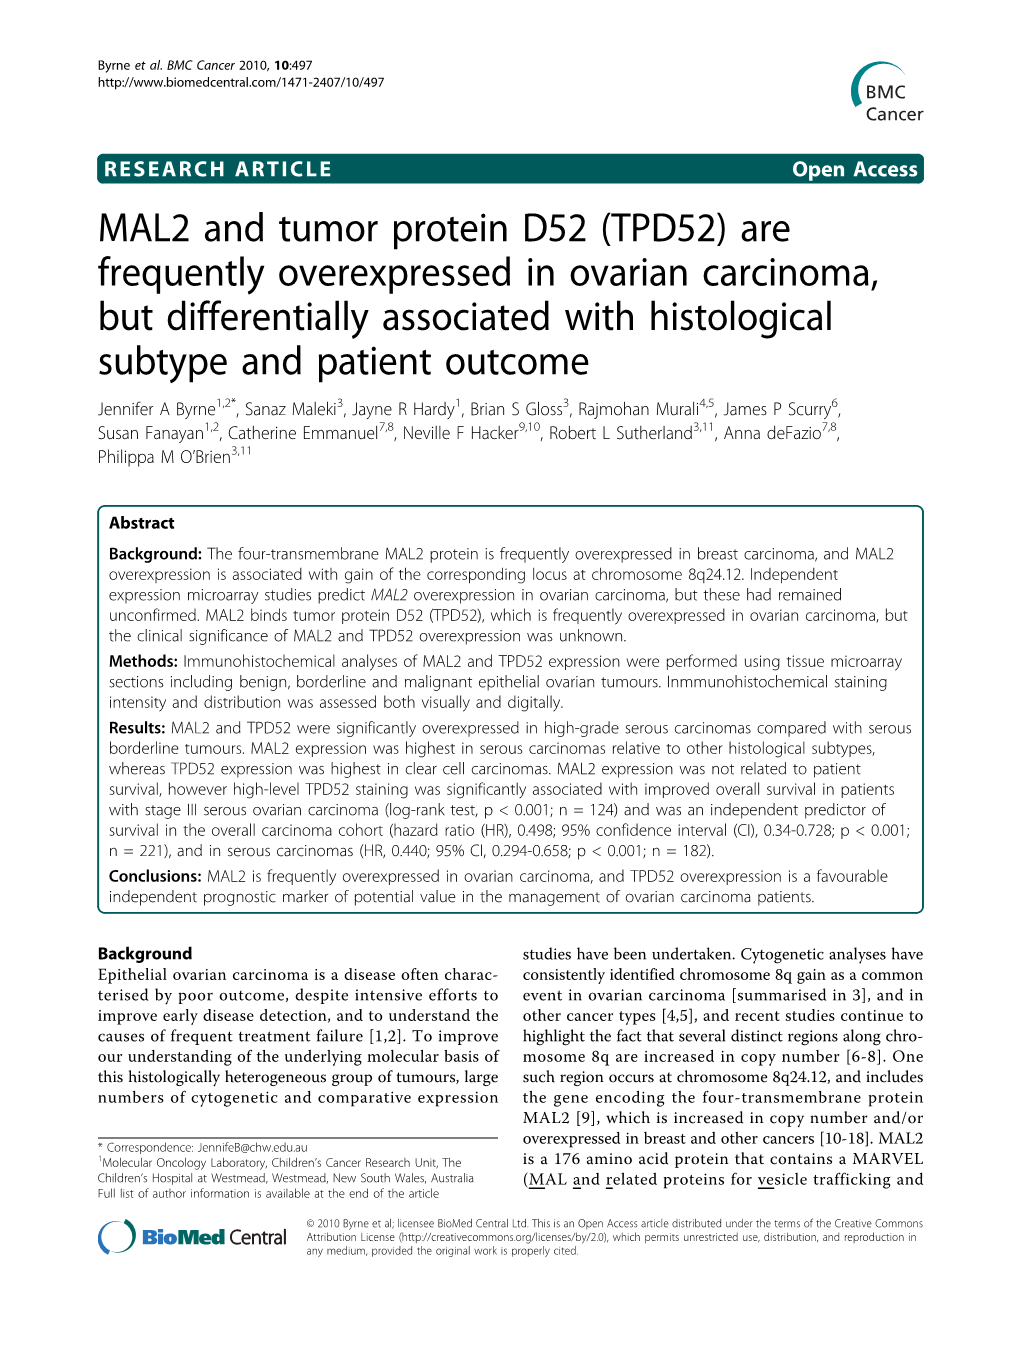 MAL2 and Tumor Protein D52 (TPD52) Are Frequently Overexpressed in Ovarian Carcinoma, but Differentially Associated with Histolo